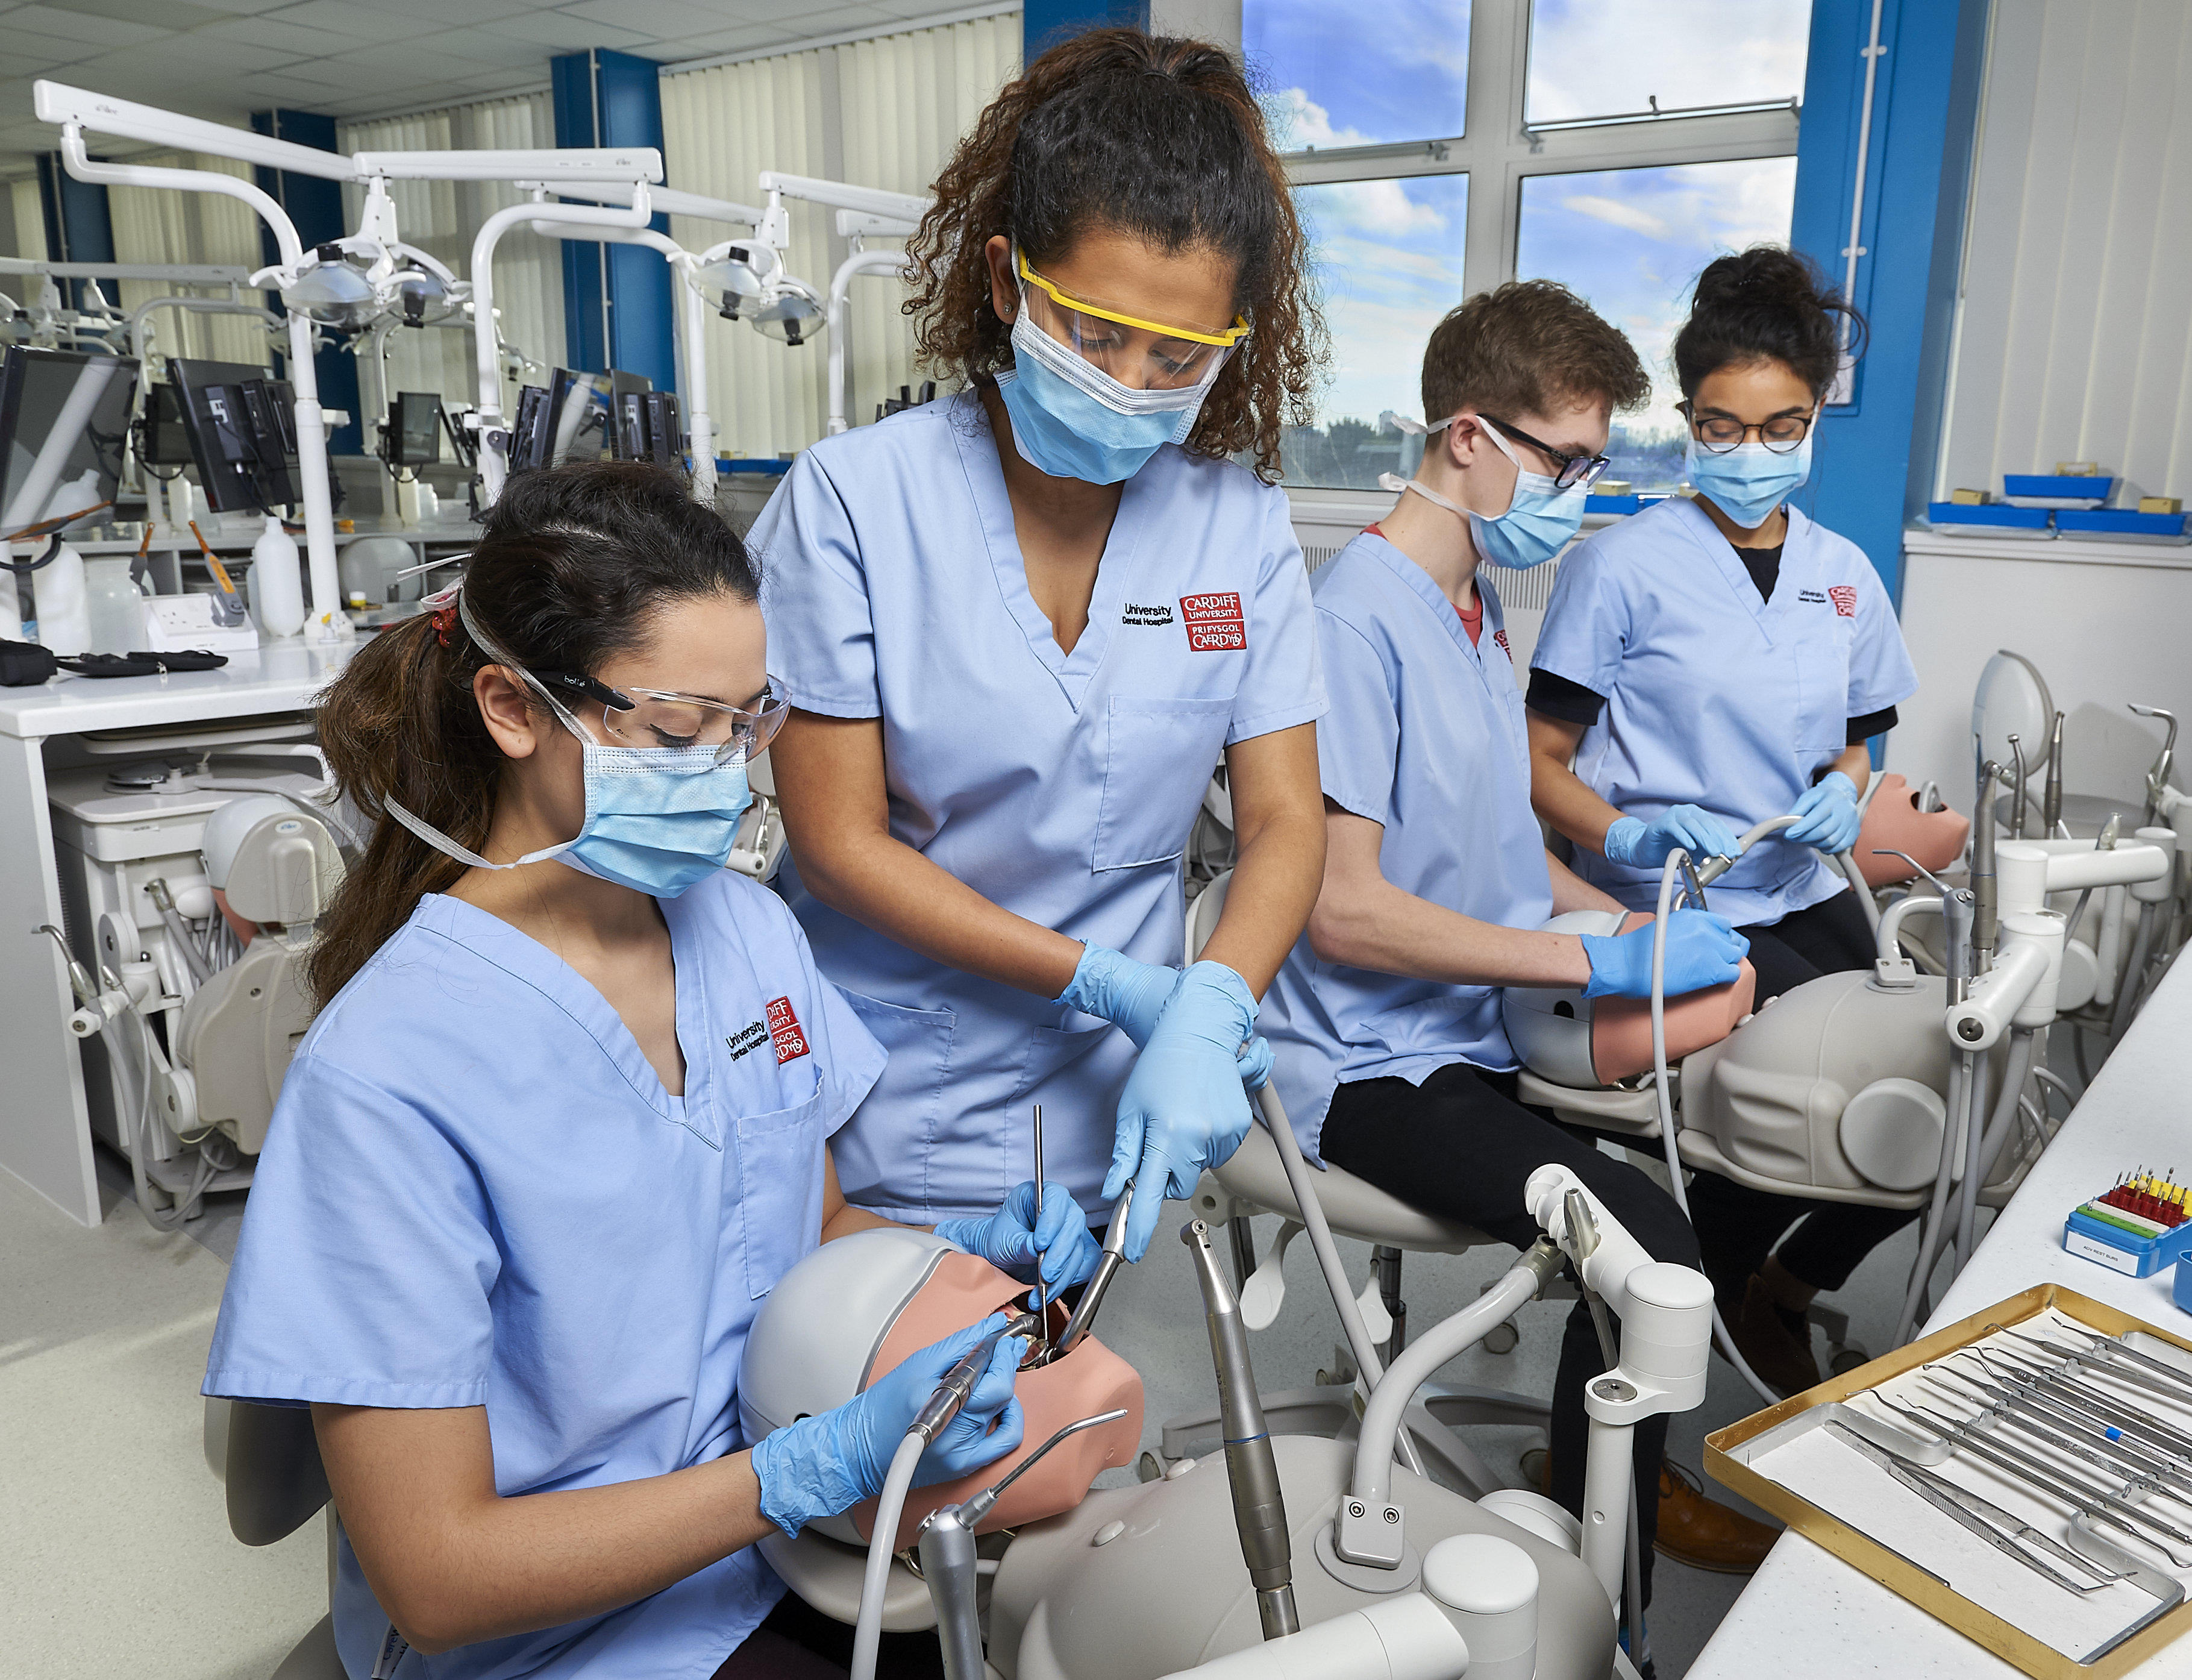 Cardiff Dental School - Year 5 Students at Mountain Ash - YouTube